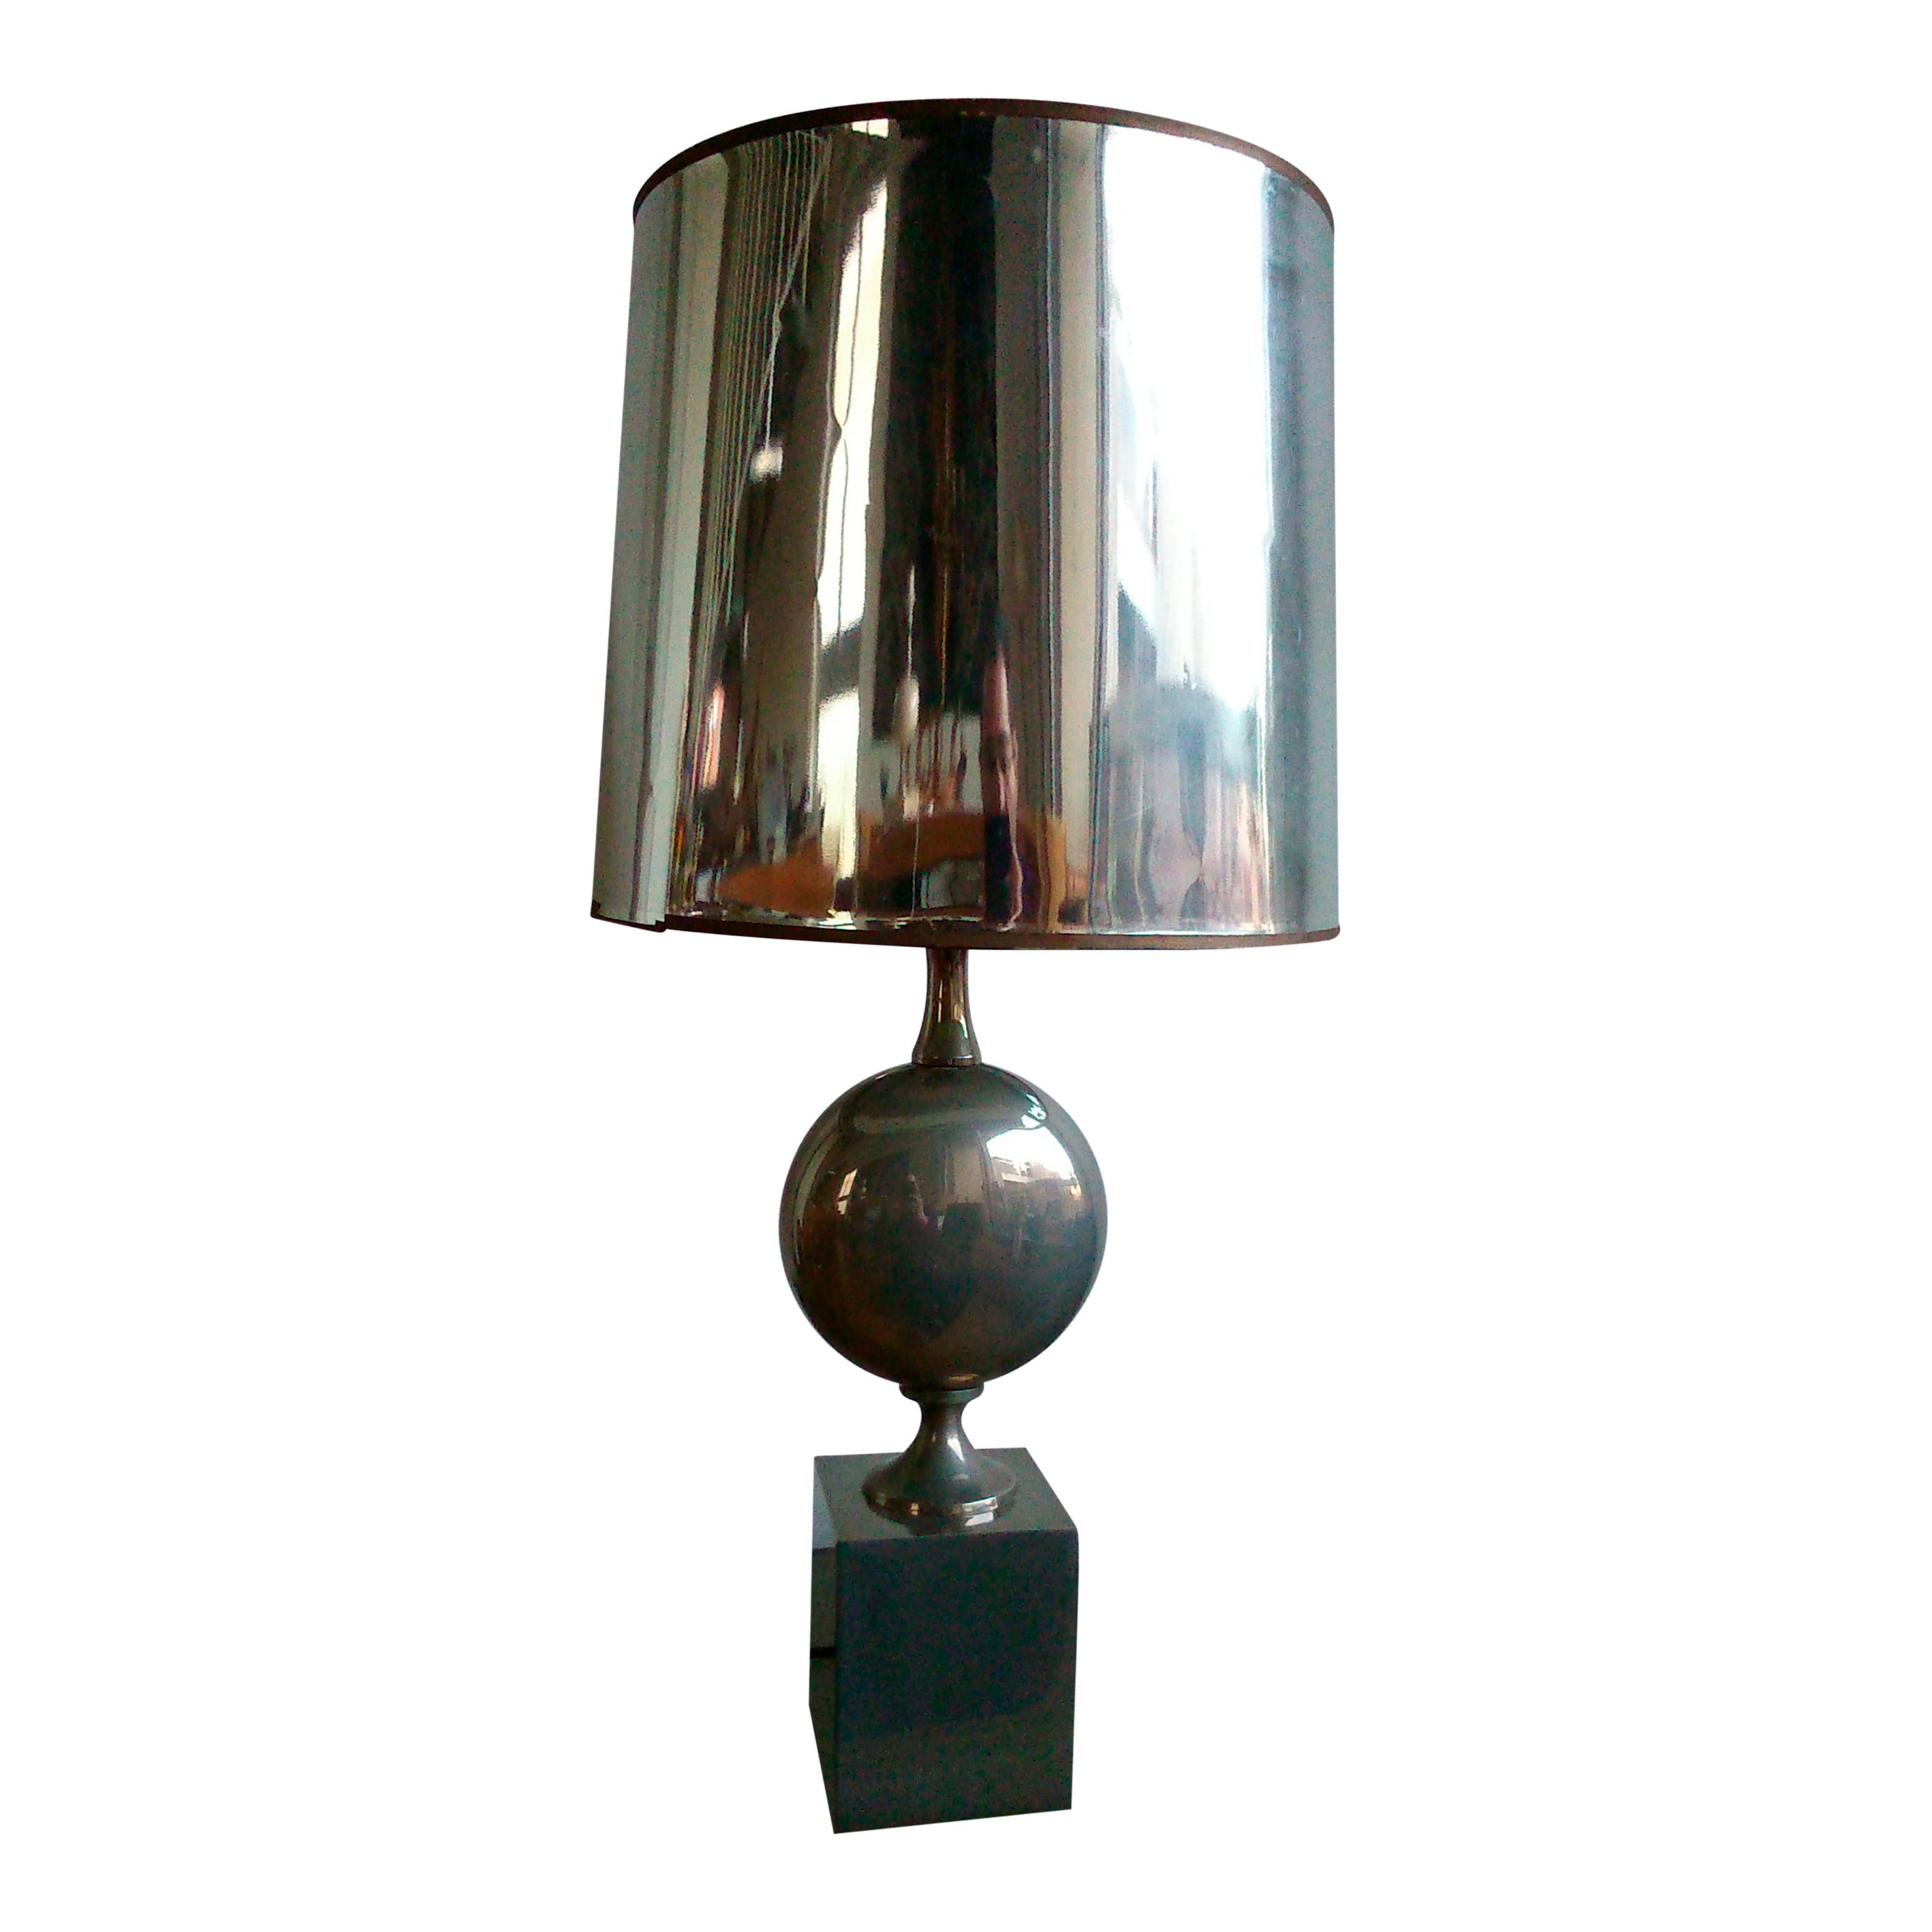 Maison Barbier polished steel table lamp - France 1970's - Ipso Facto